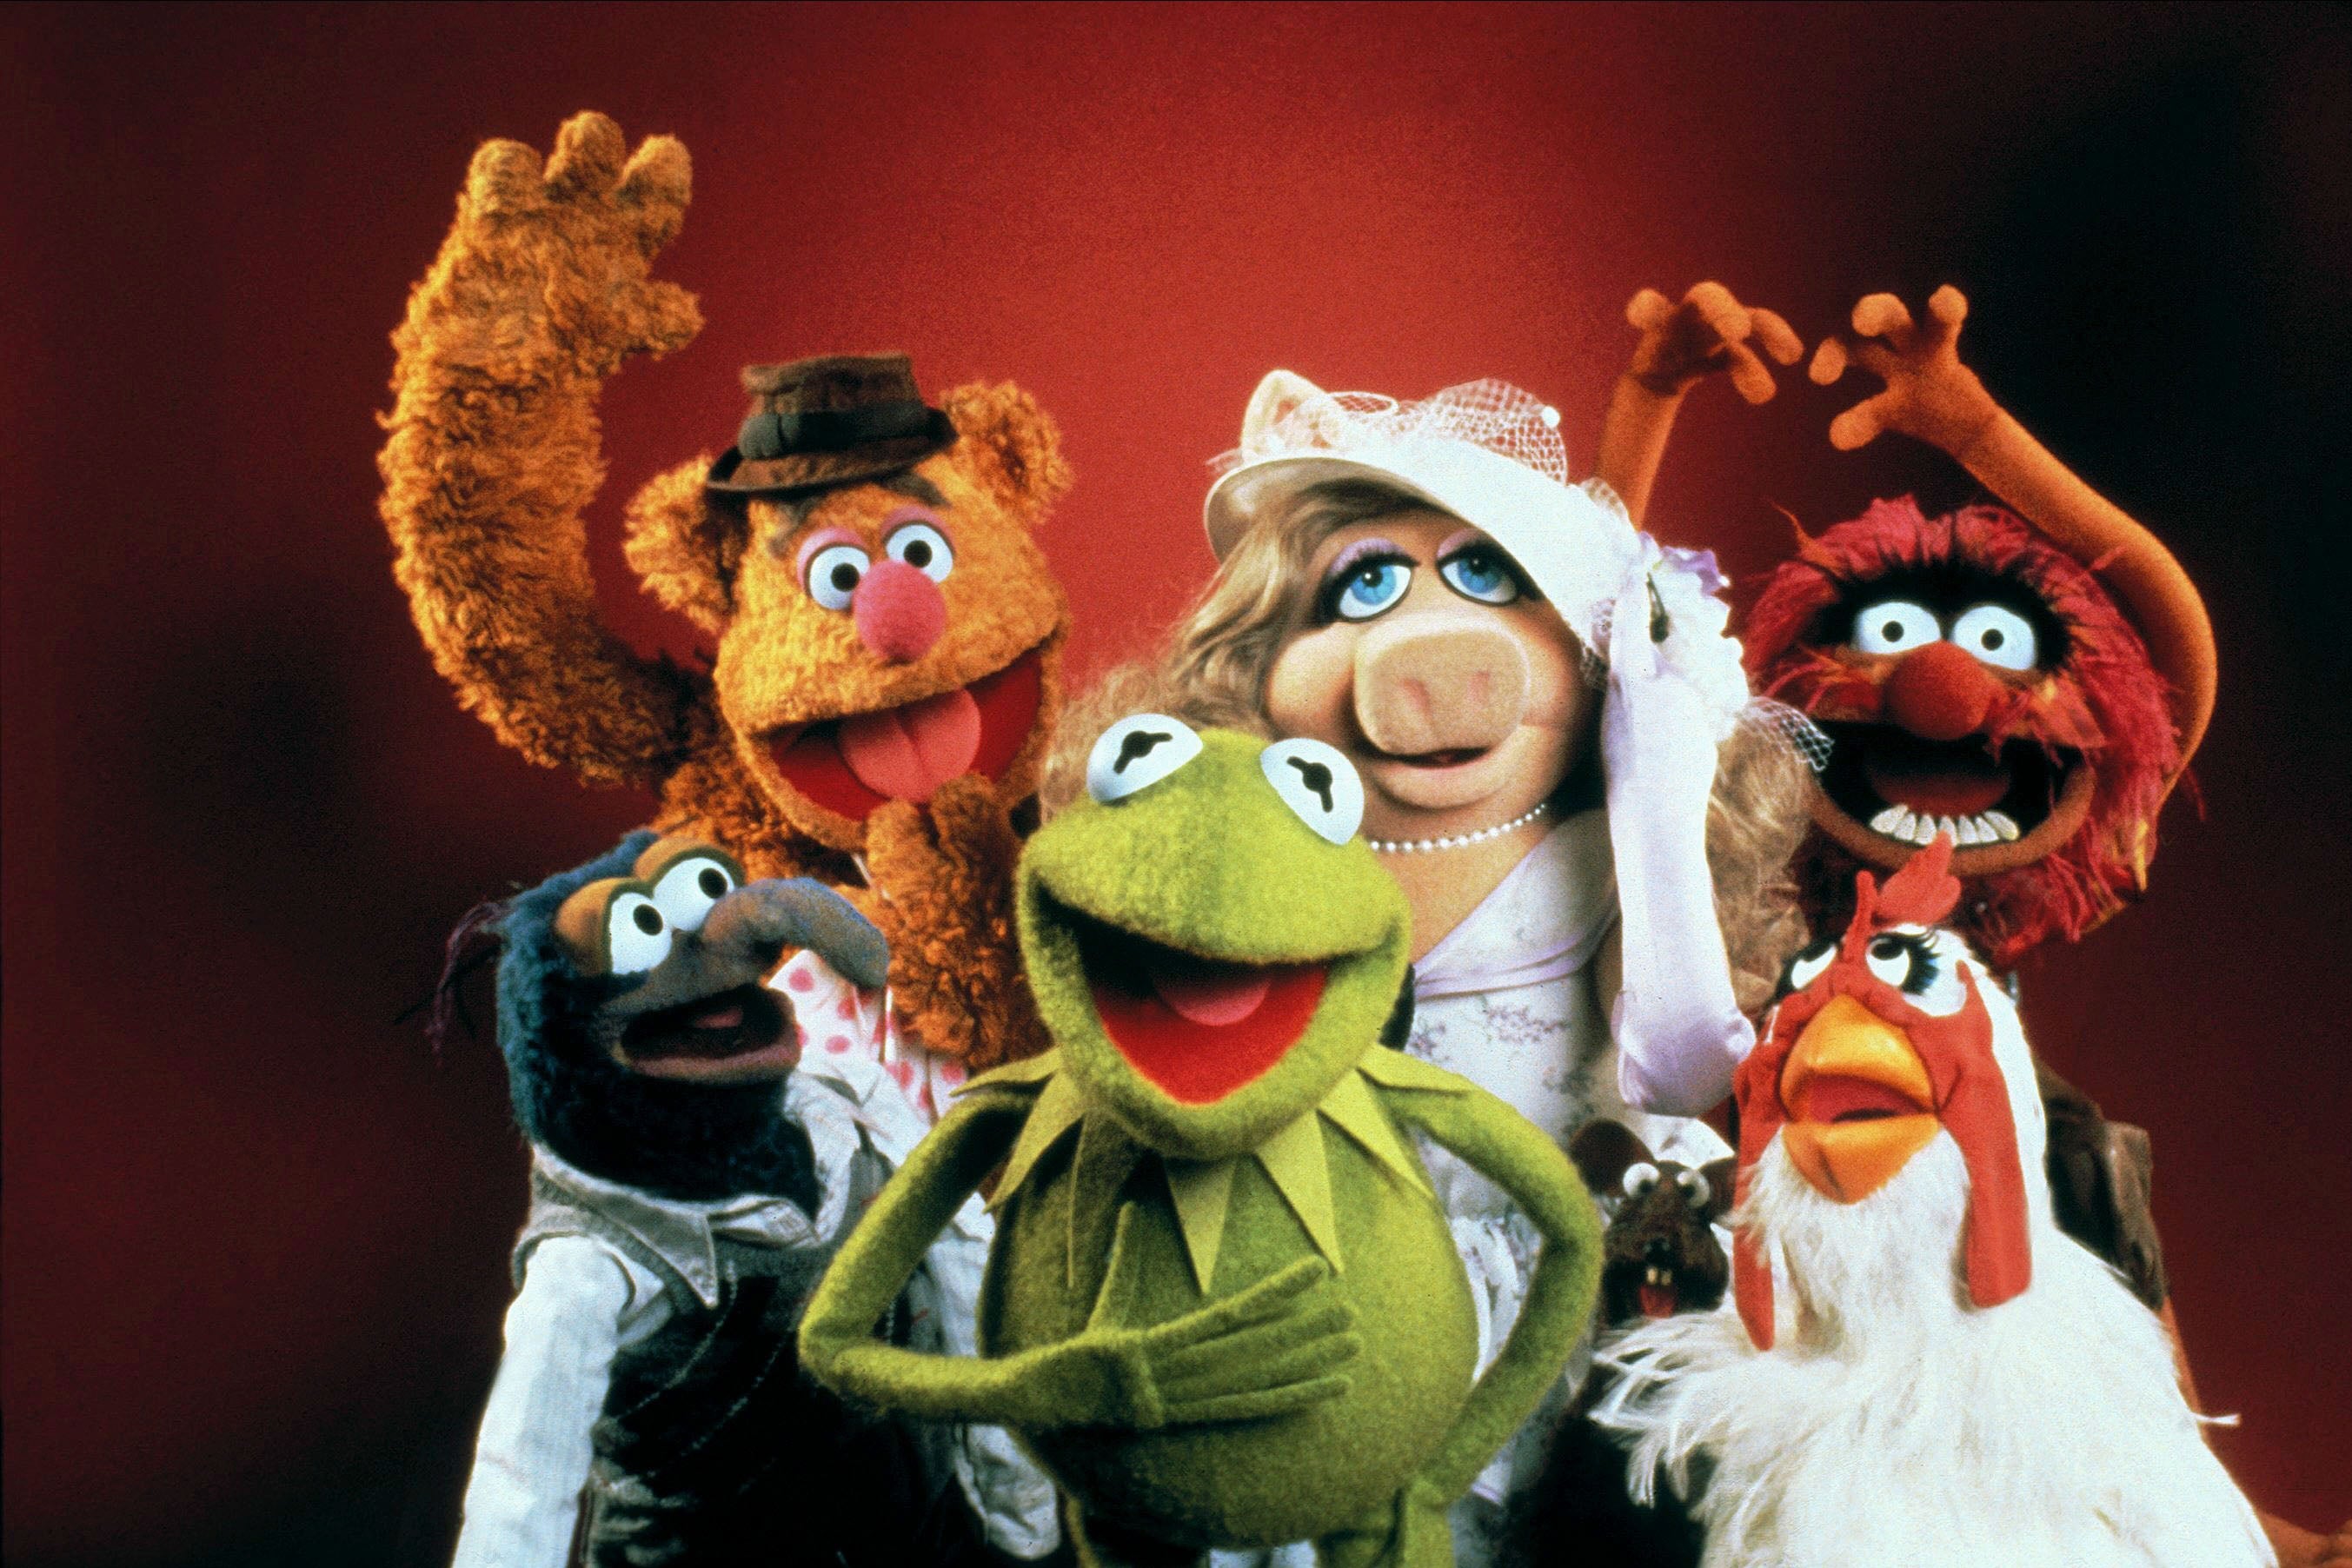 A collection of the Muppets pose happily against a red background.